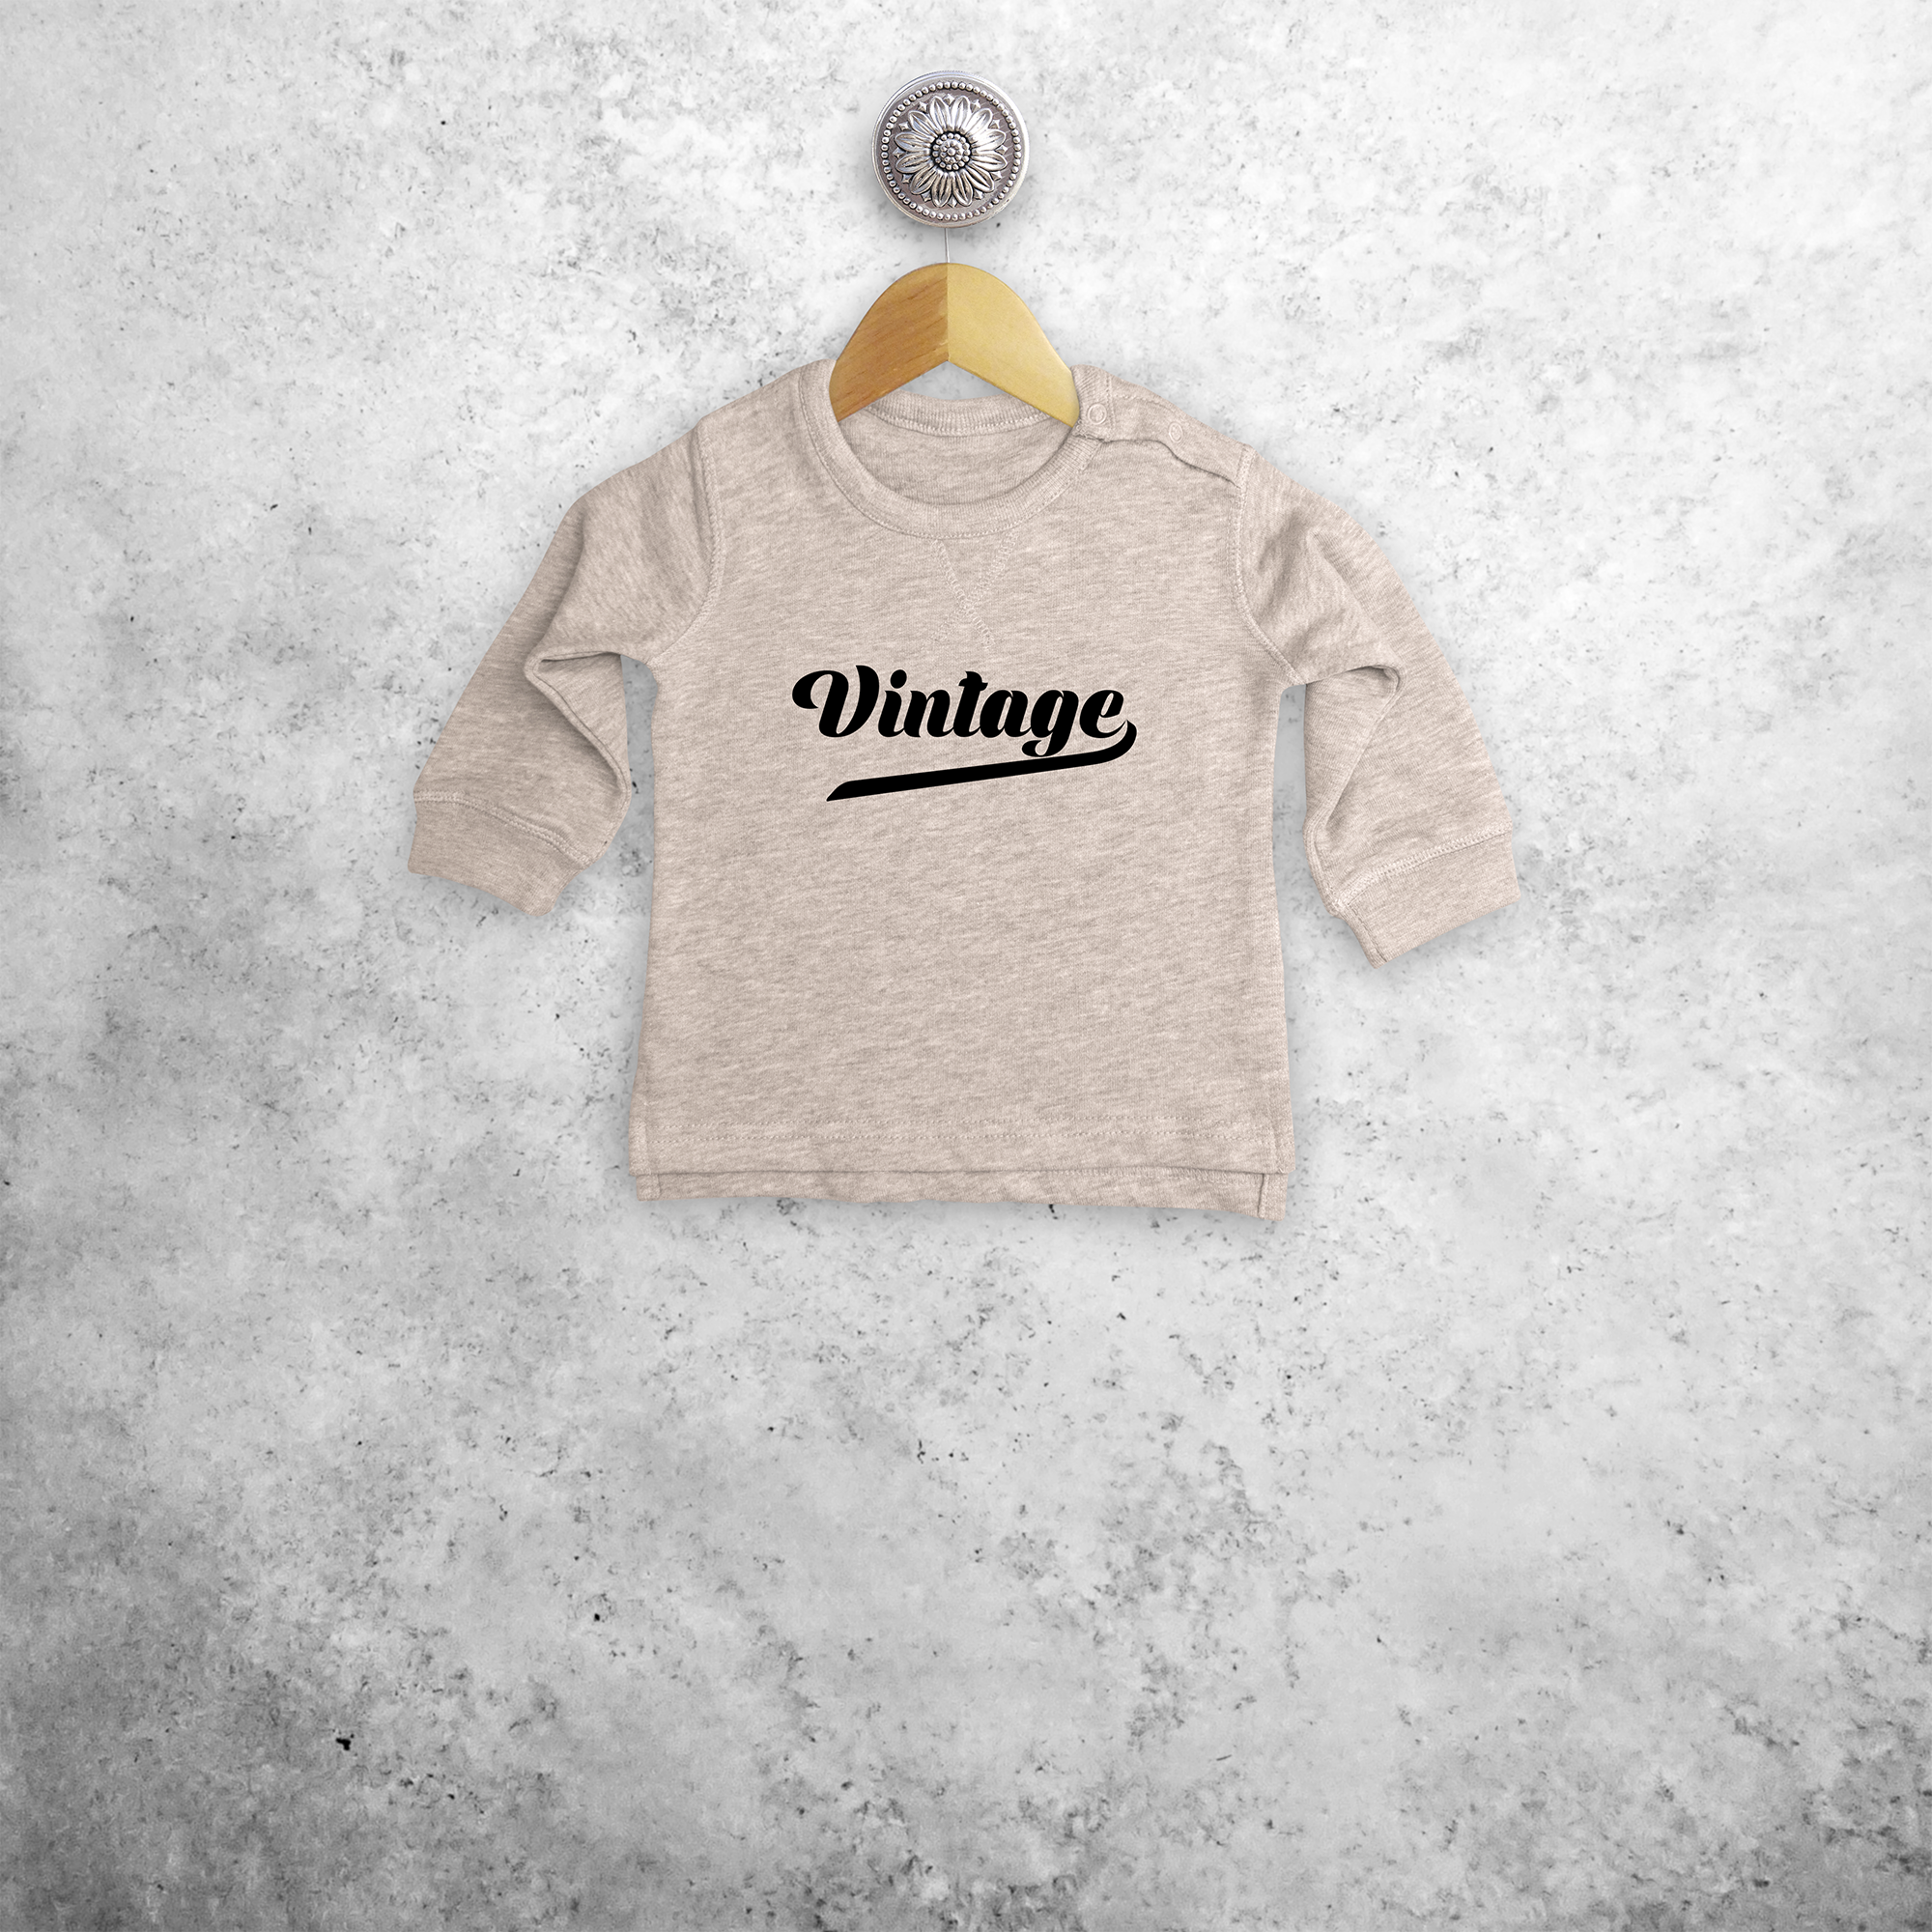 'Vintage' baby sweater